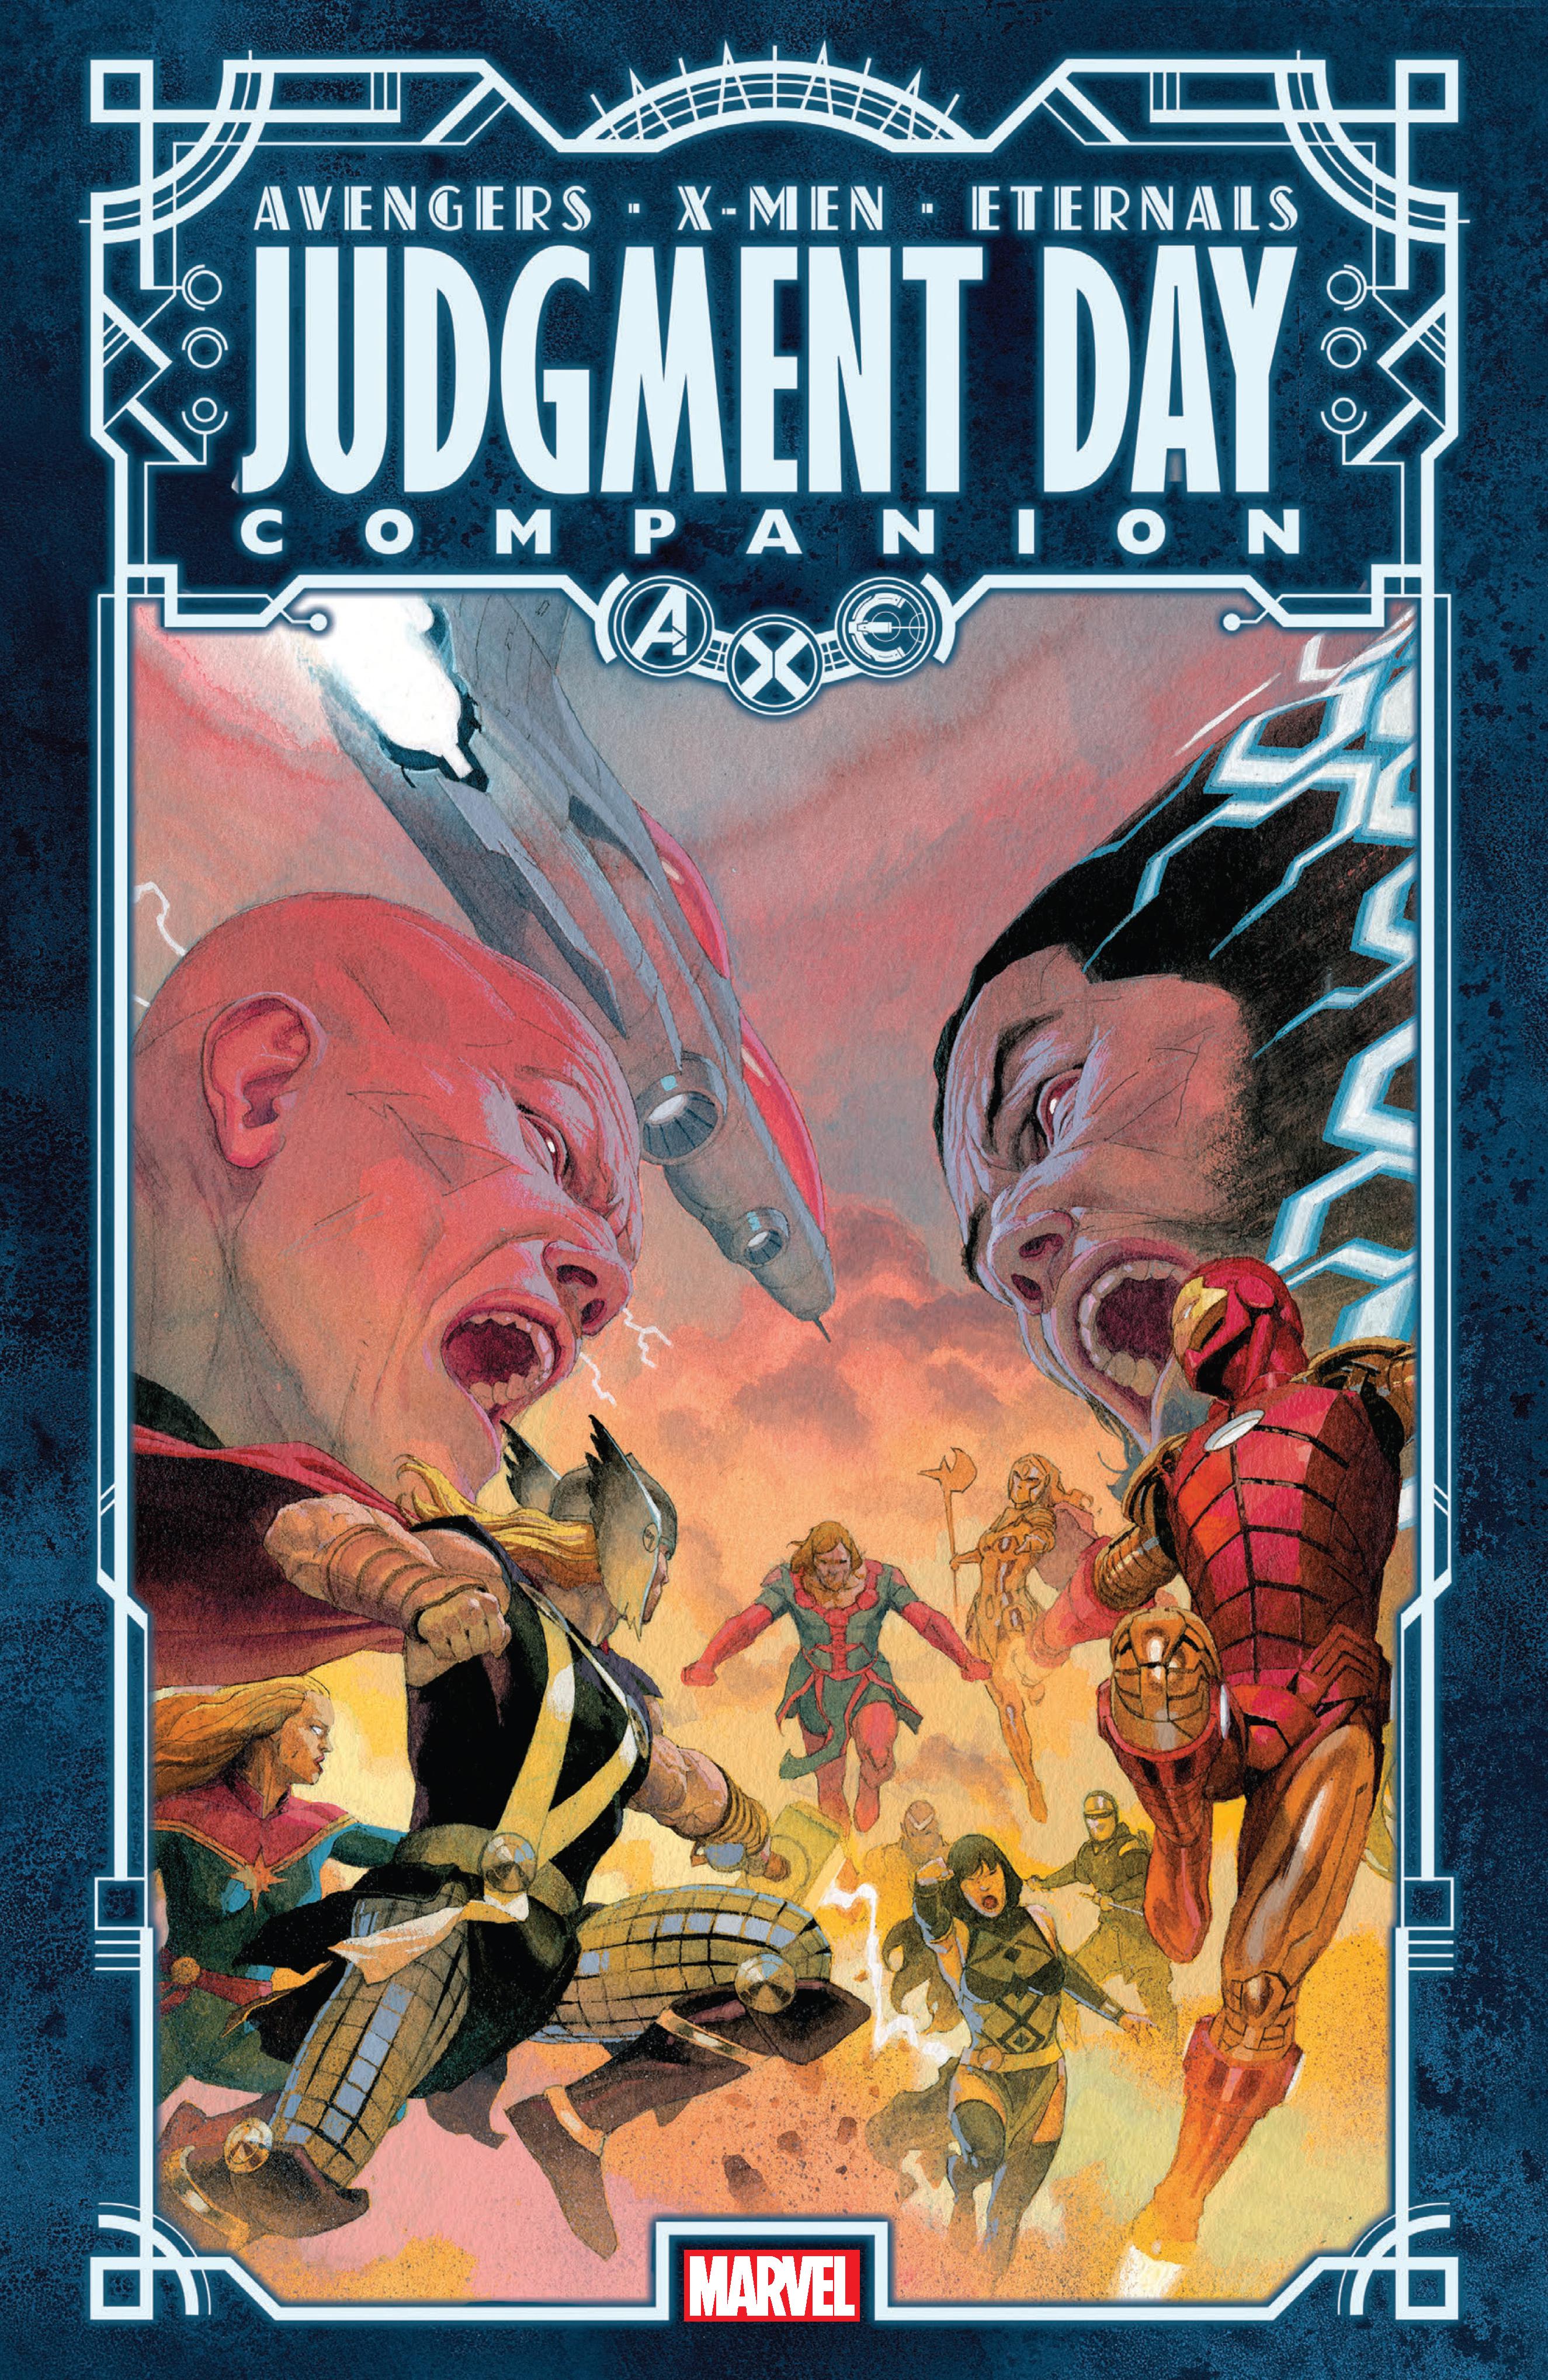 Read online A.X.E.: Judgment Day Companion comic -  Issue # TPB (Part 1) - 1